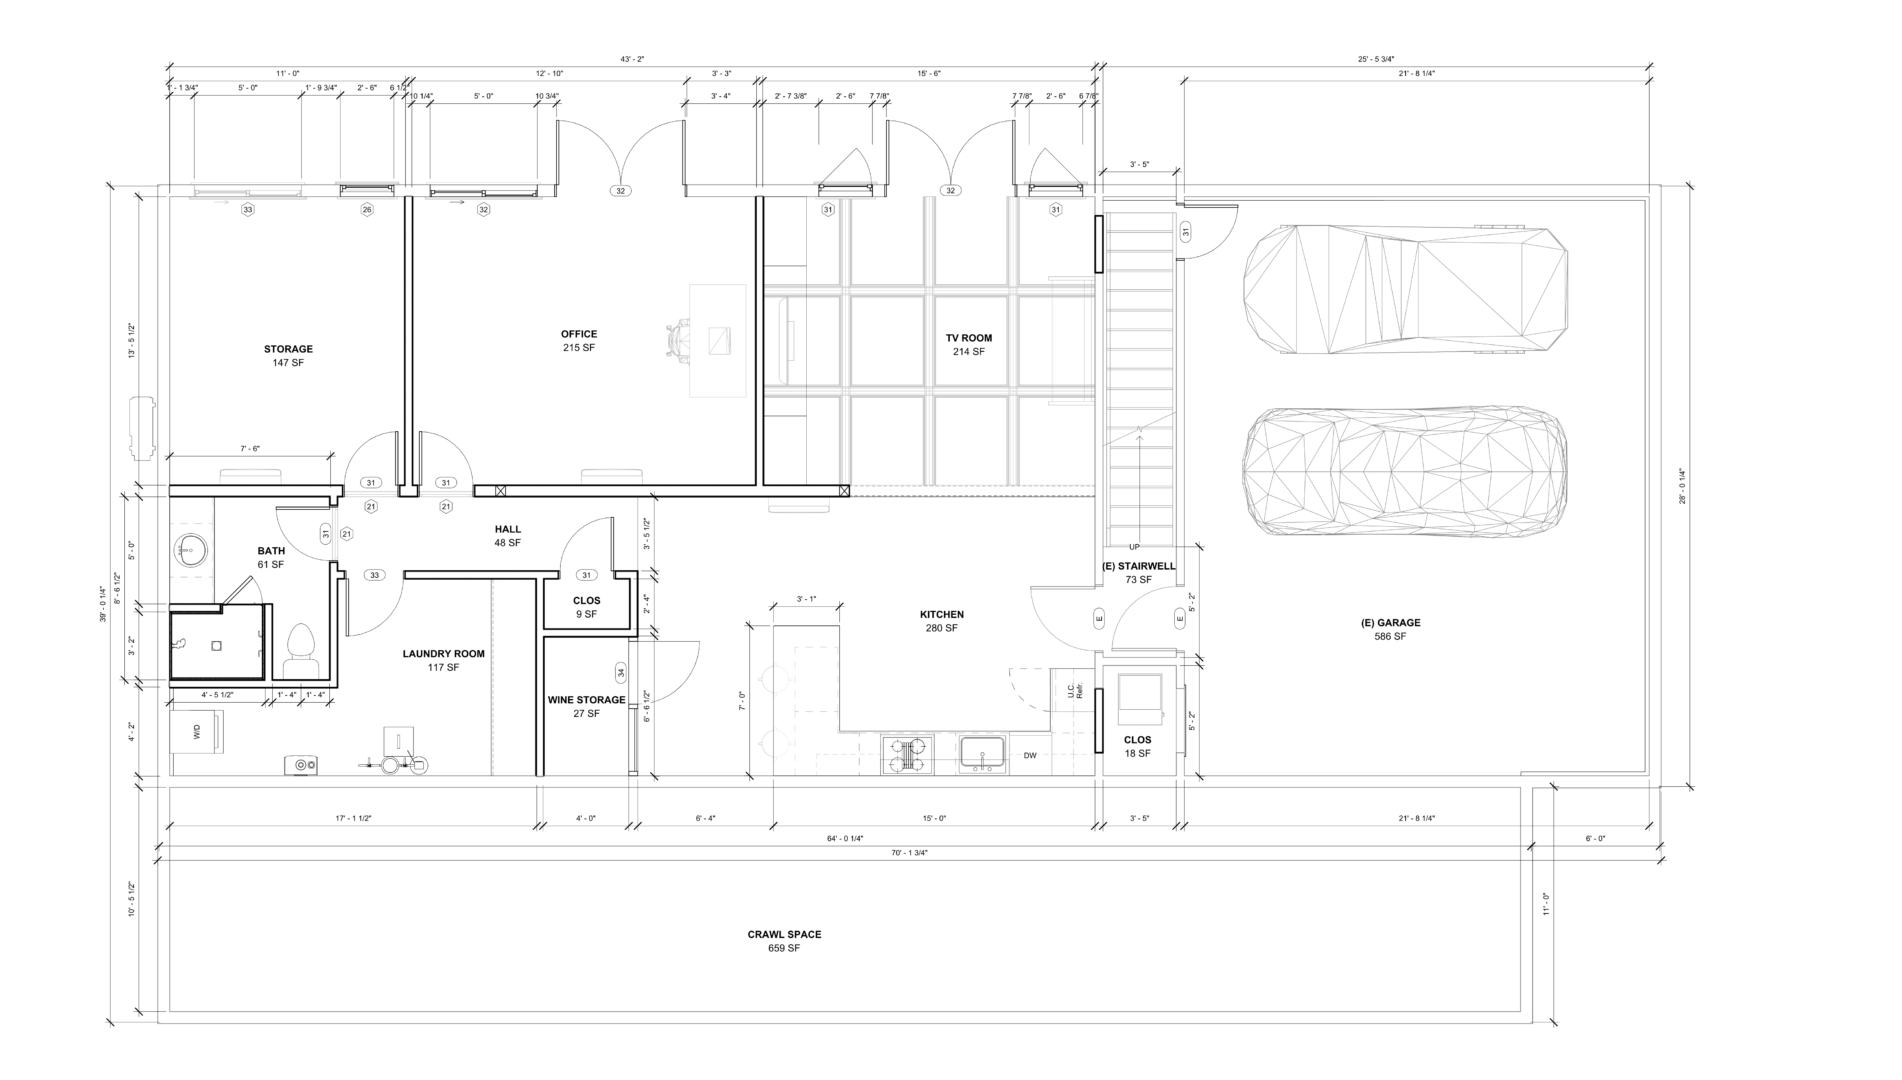 Floor Plan of Stowring Basement for Remodeling Project